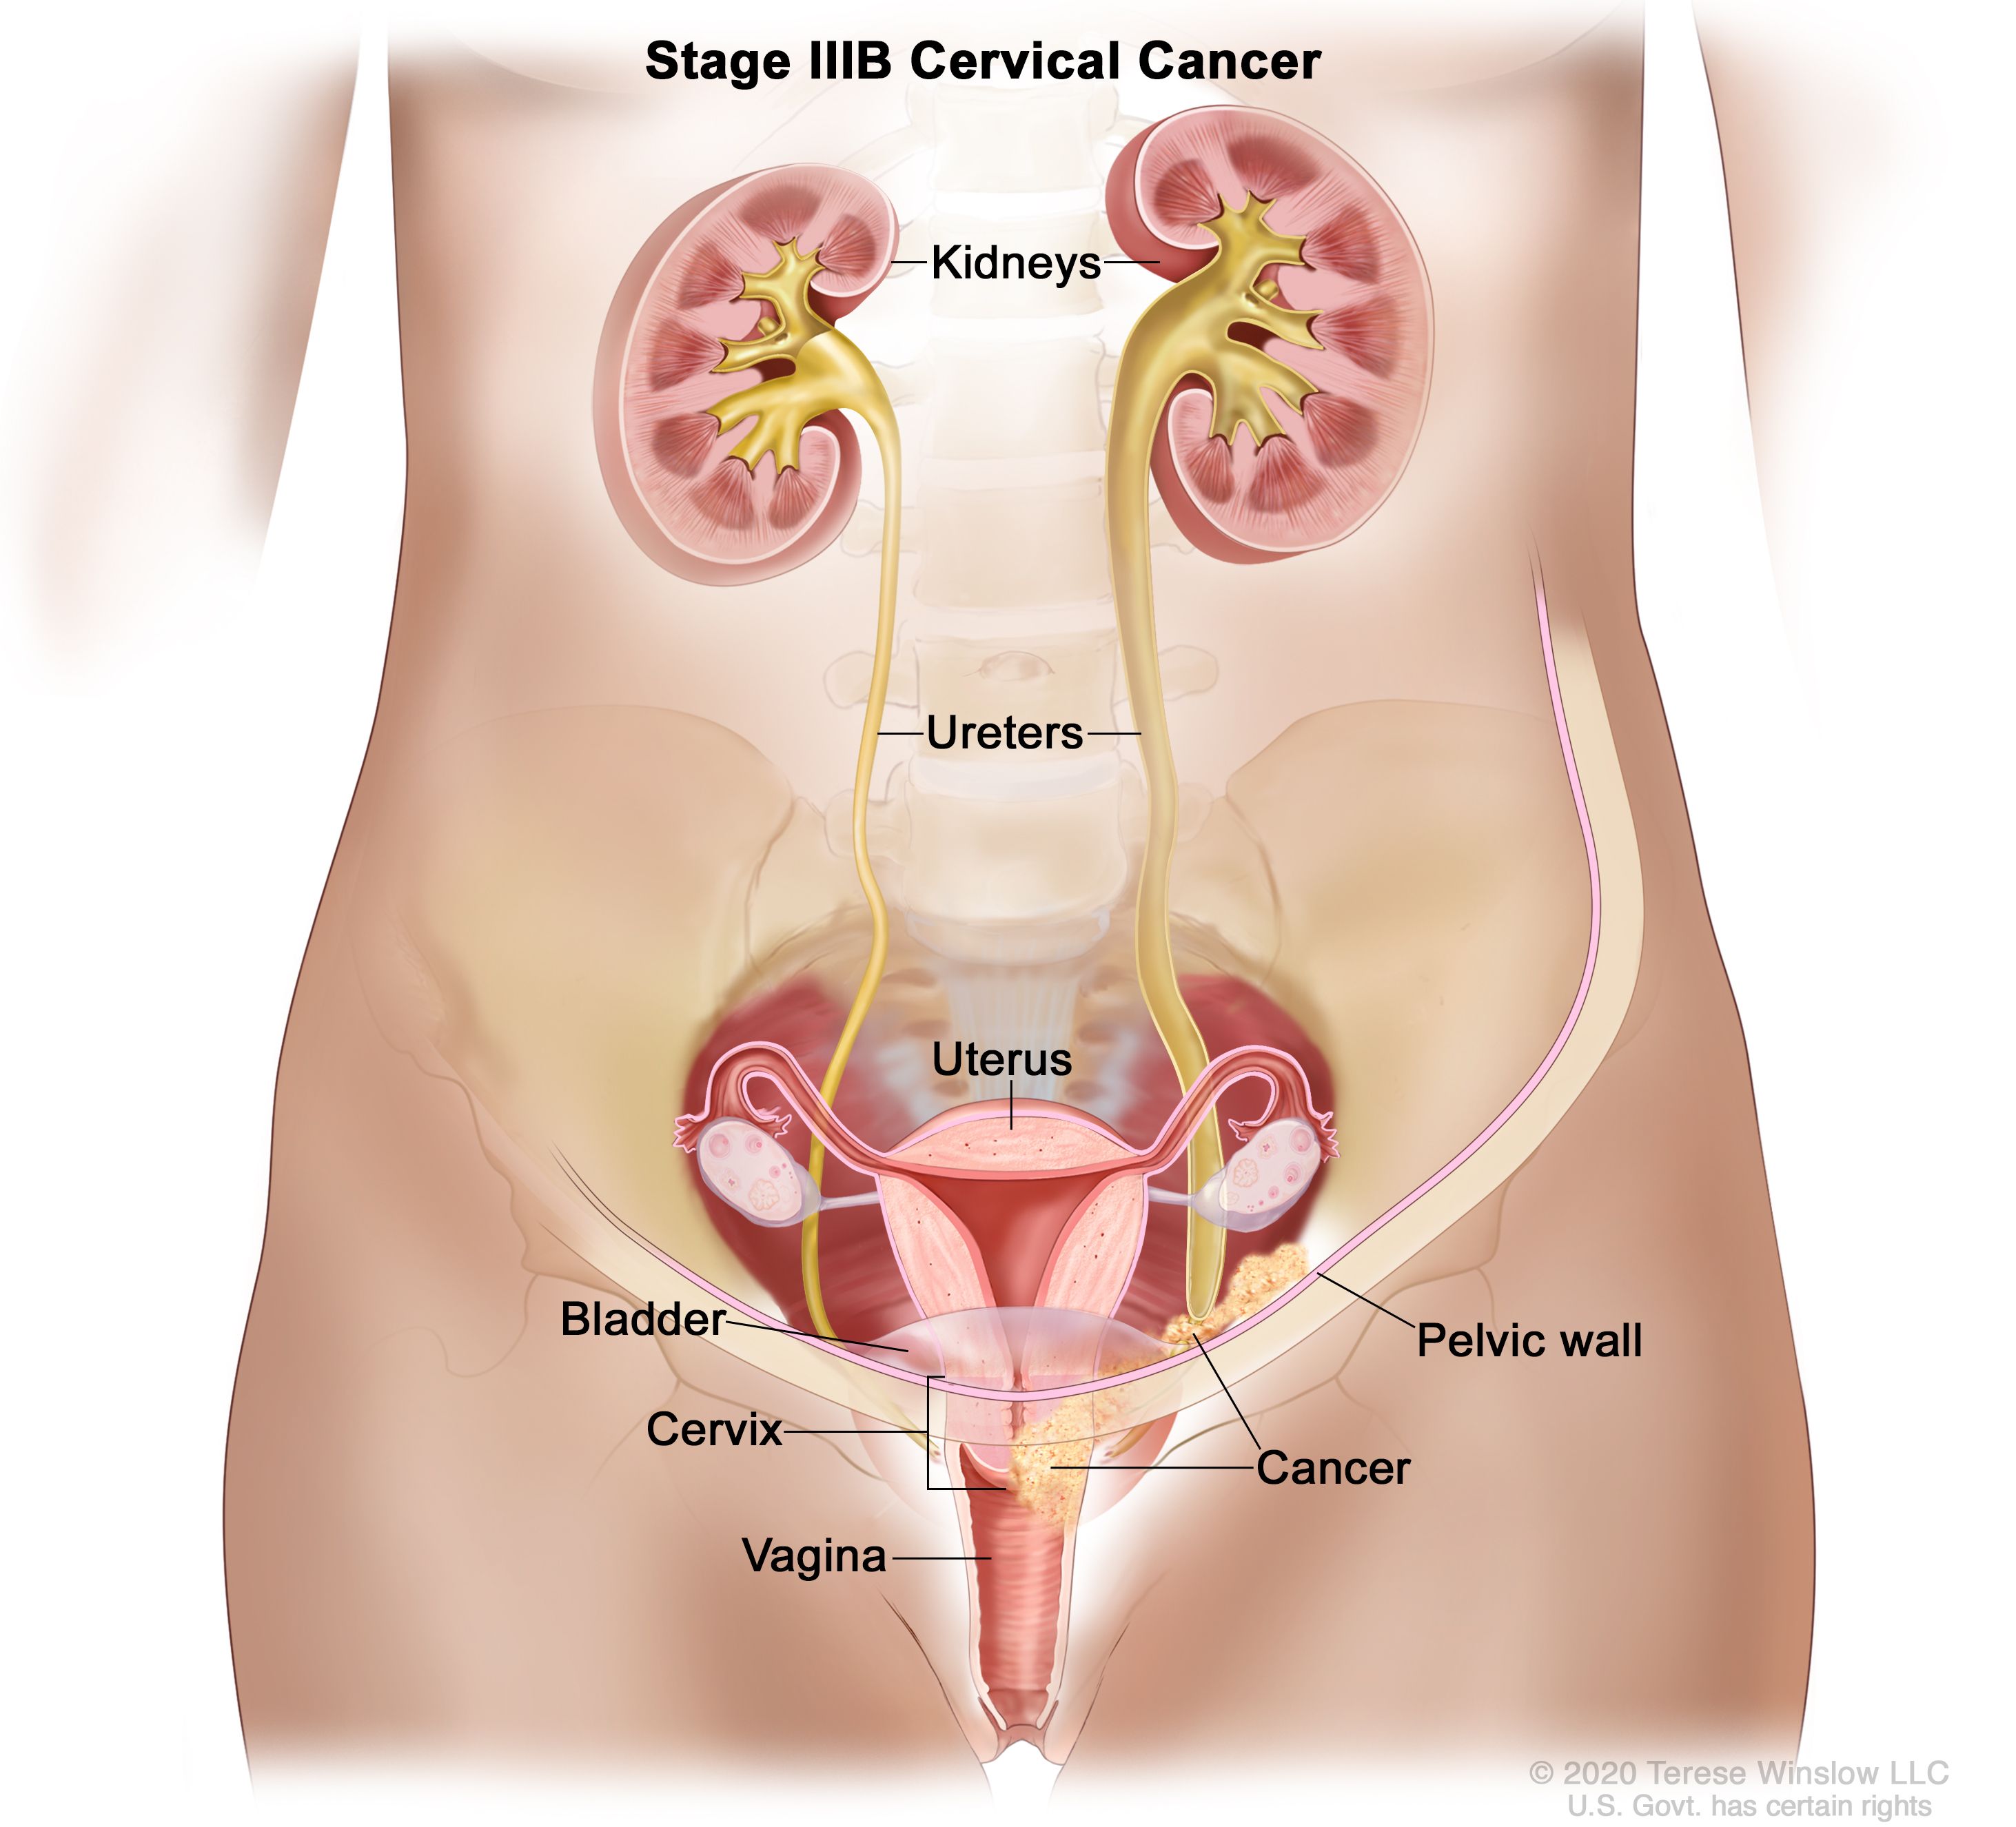 Definition Of Stage Iii Cervical Cancer Nci Dictionary Of Cancer Terms National Cancer Institute